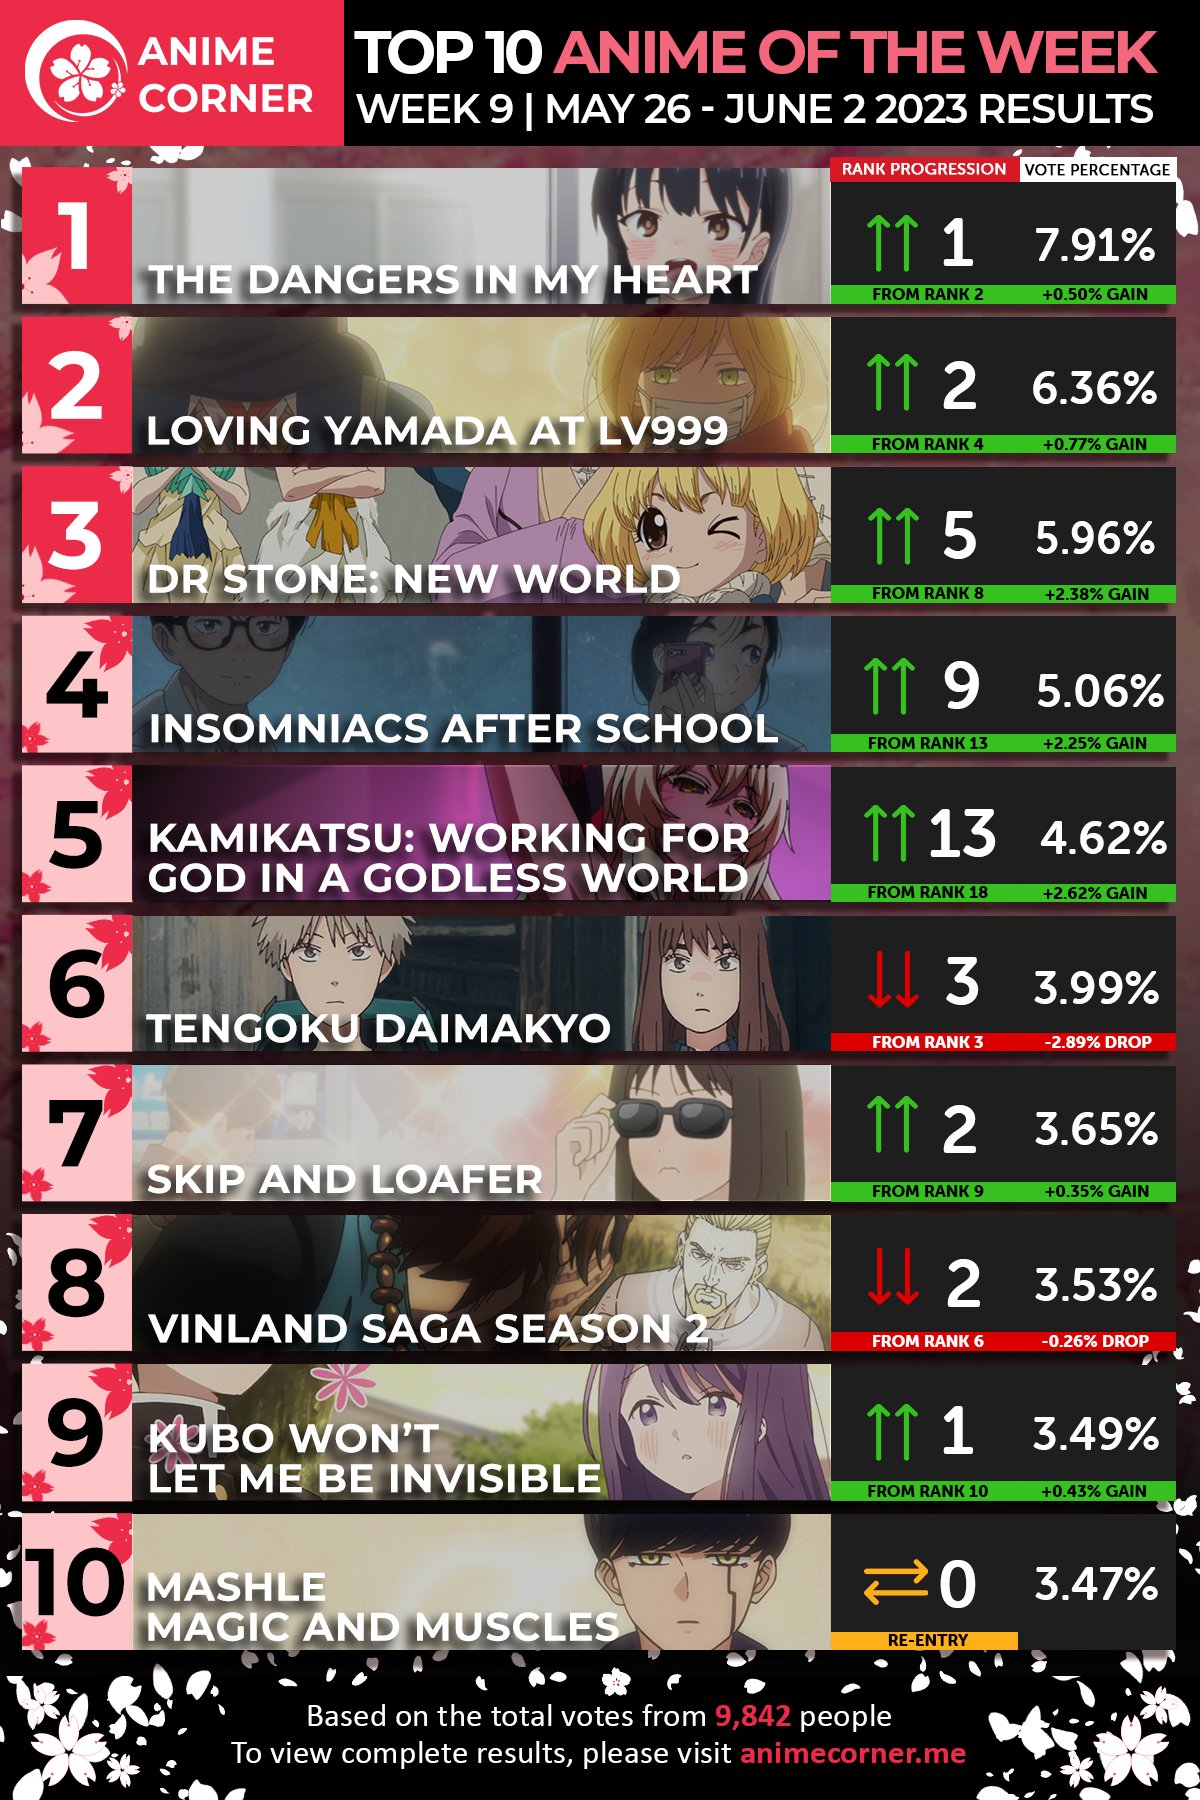 Anime Corner - Top 10 Anime of Week 9  Spring 2023 🌸 The Dangers in My  Heart is on top for the first time this season, with Loving Yamada at Lv999